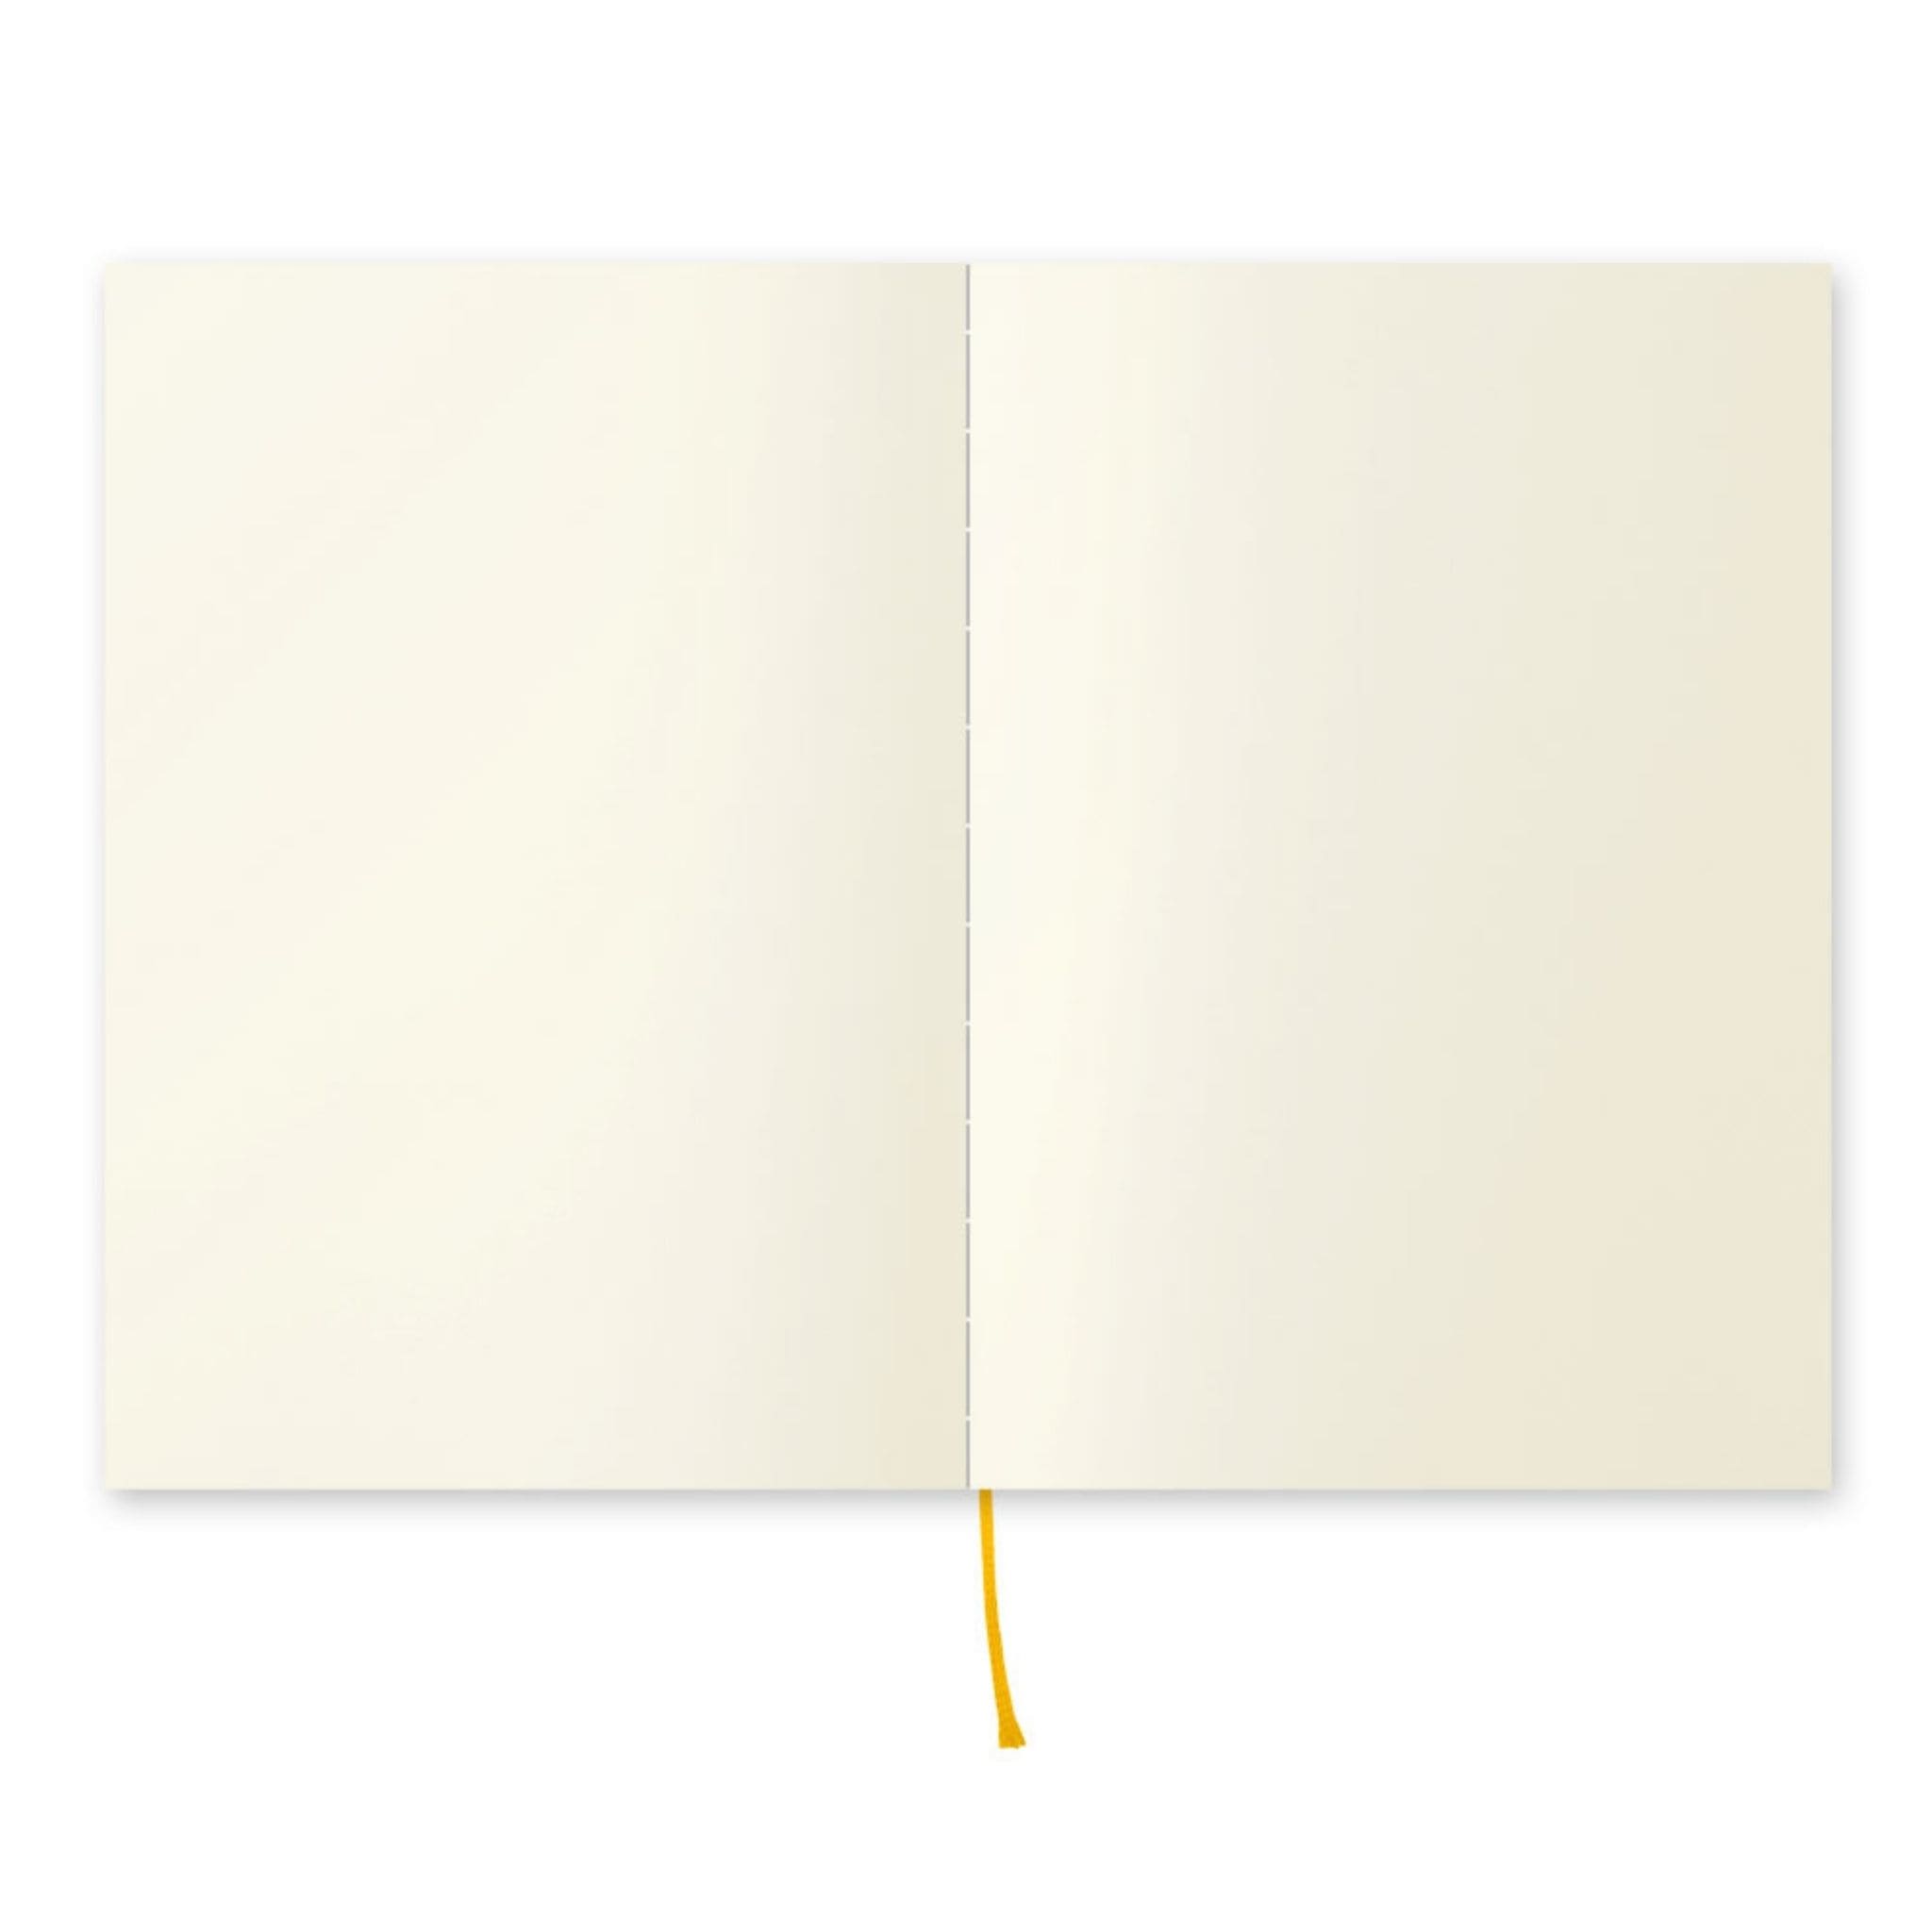 Midori MD A5 Plain Notebook with blank pages - Paper Kooka